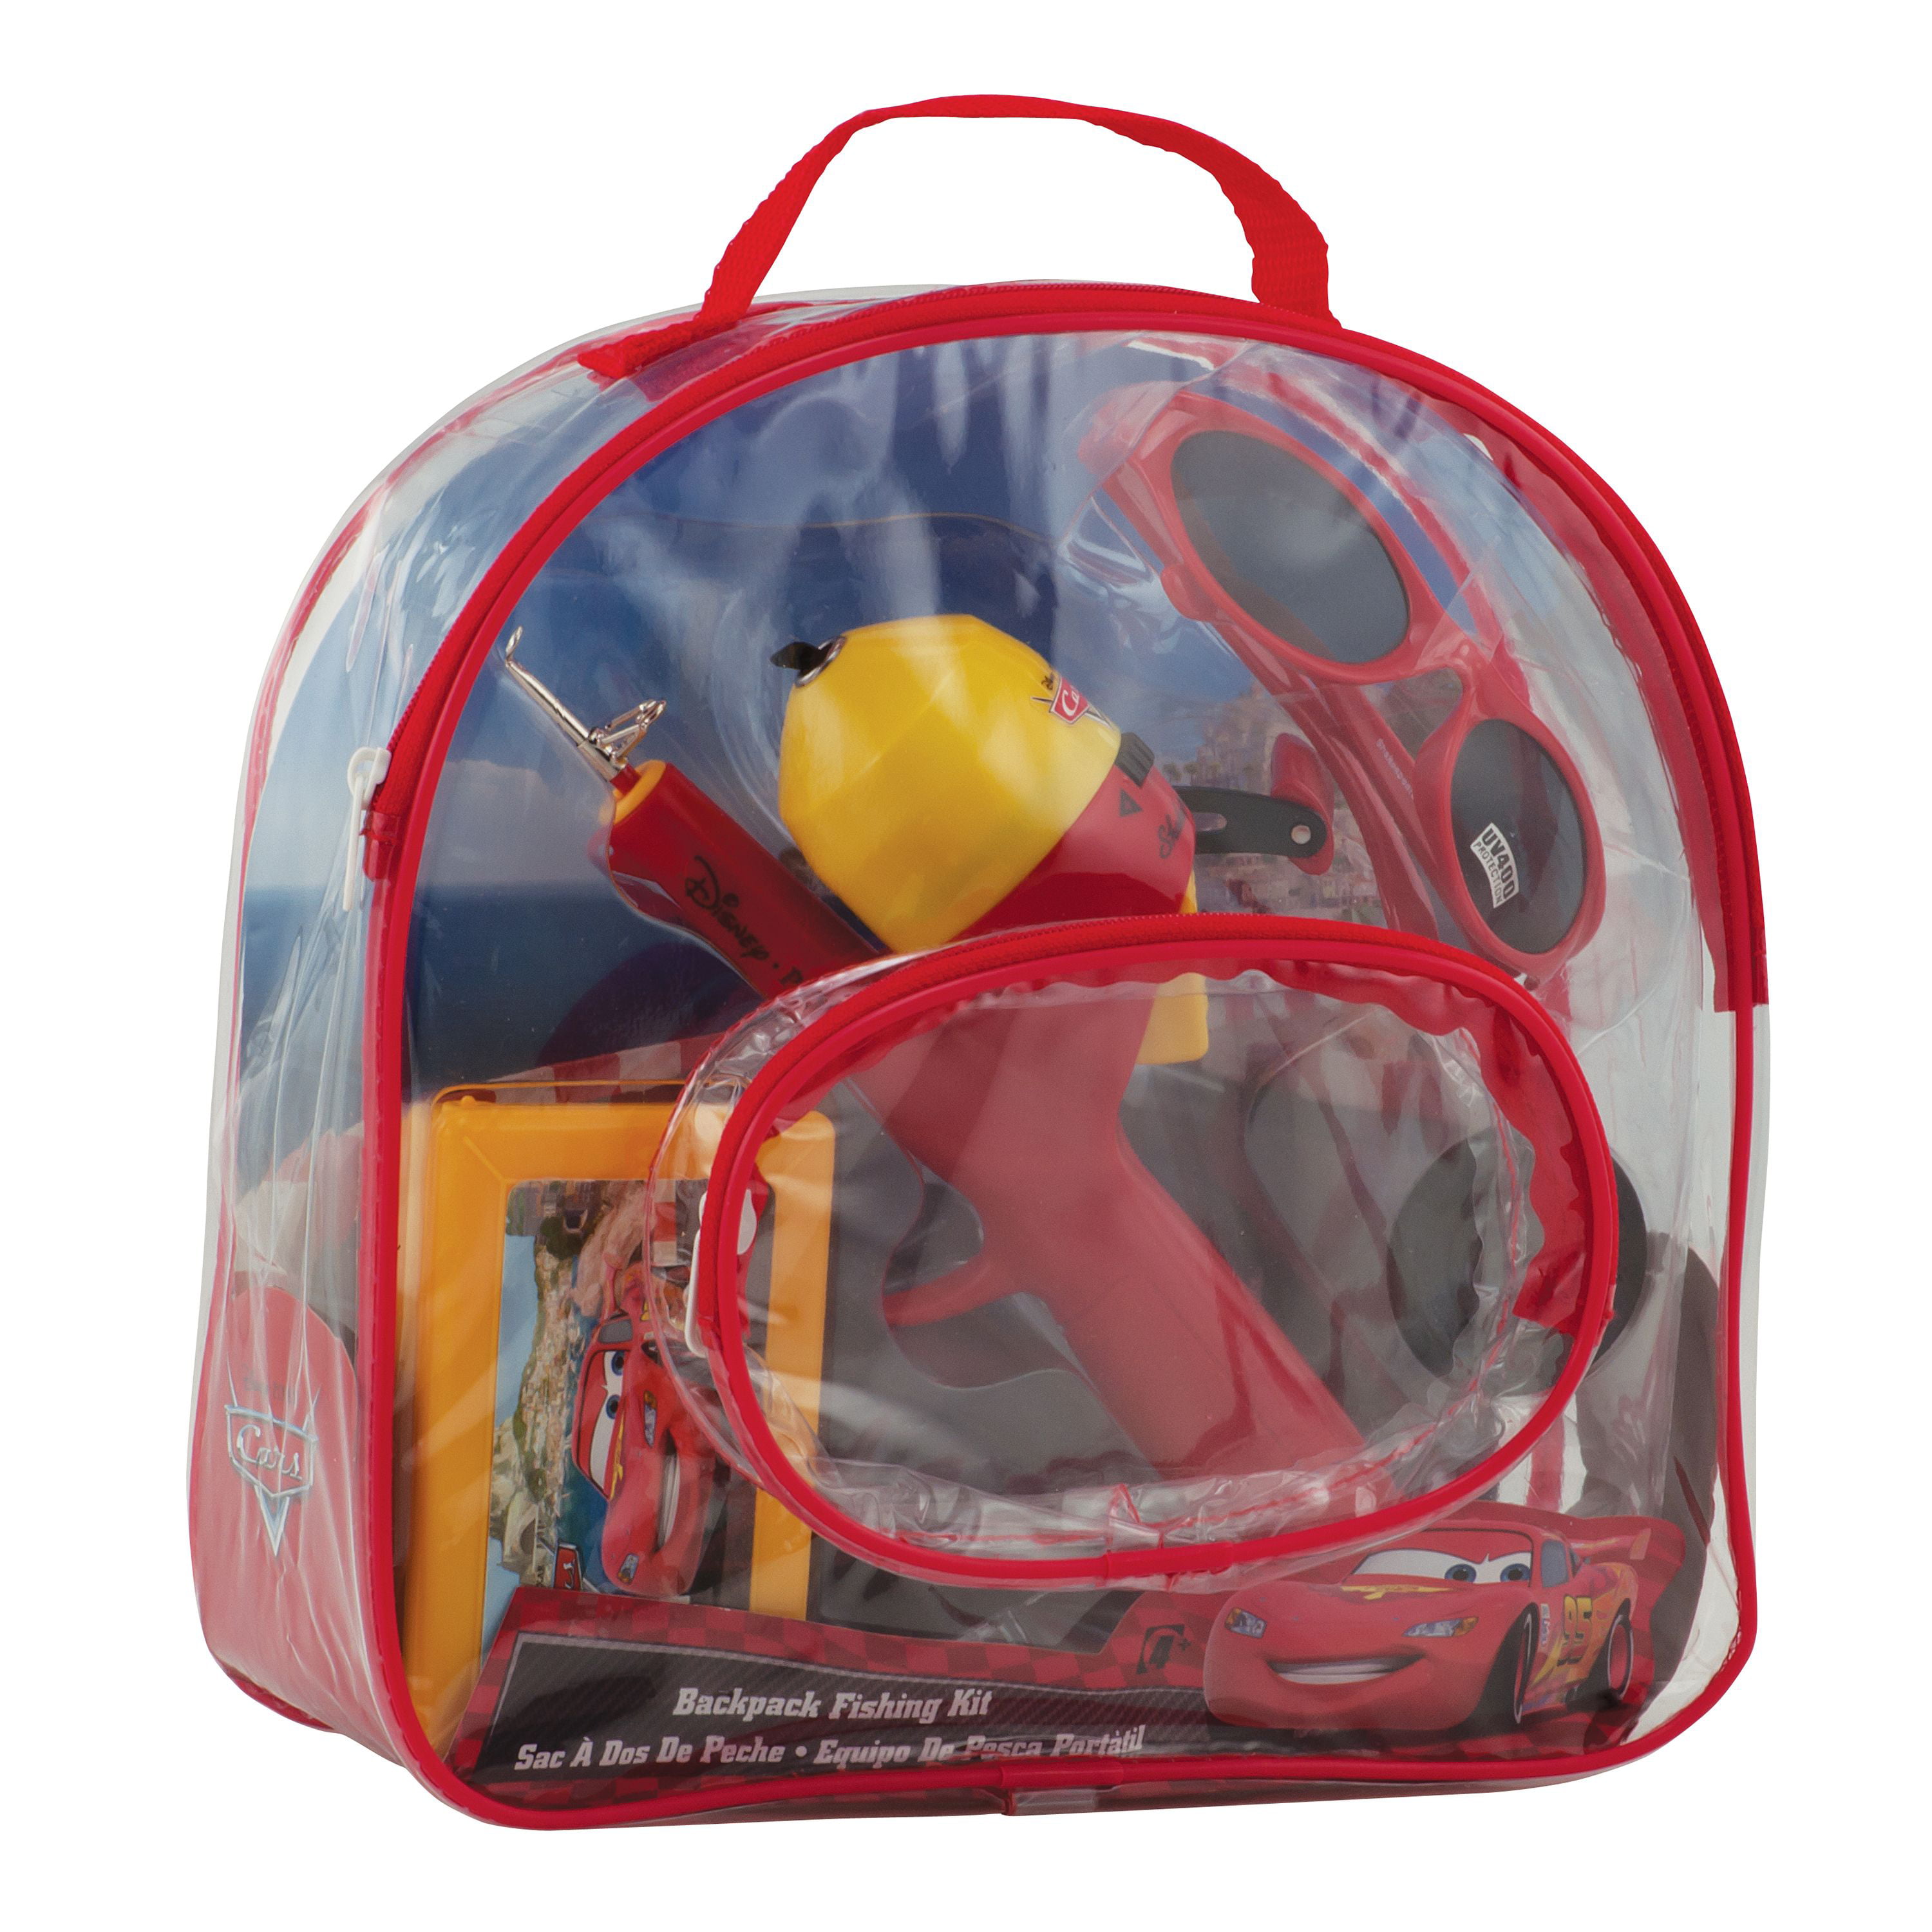 Shakespeare Youth Fishing Kits Disney Crds, Backpack